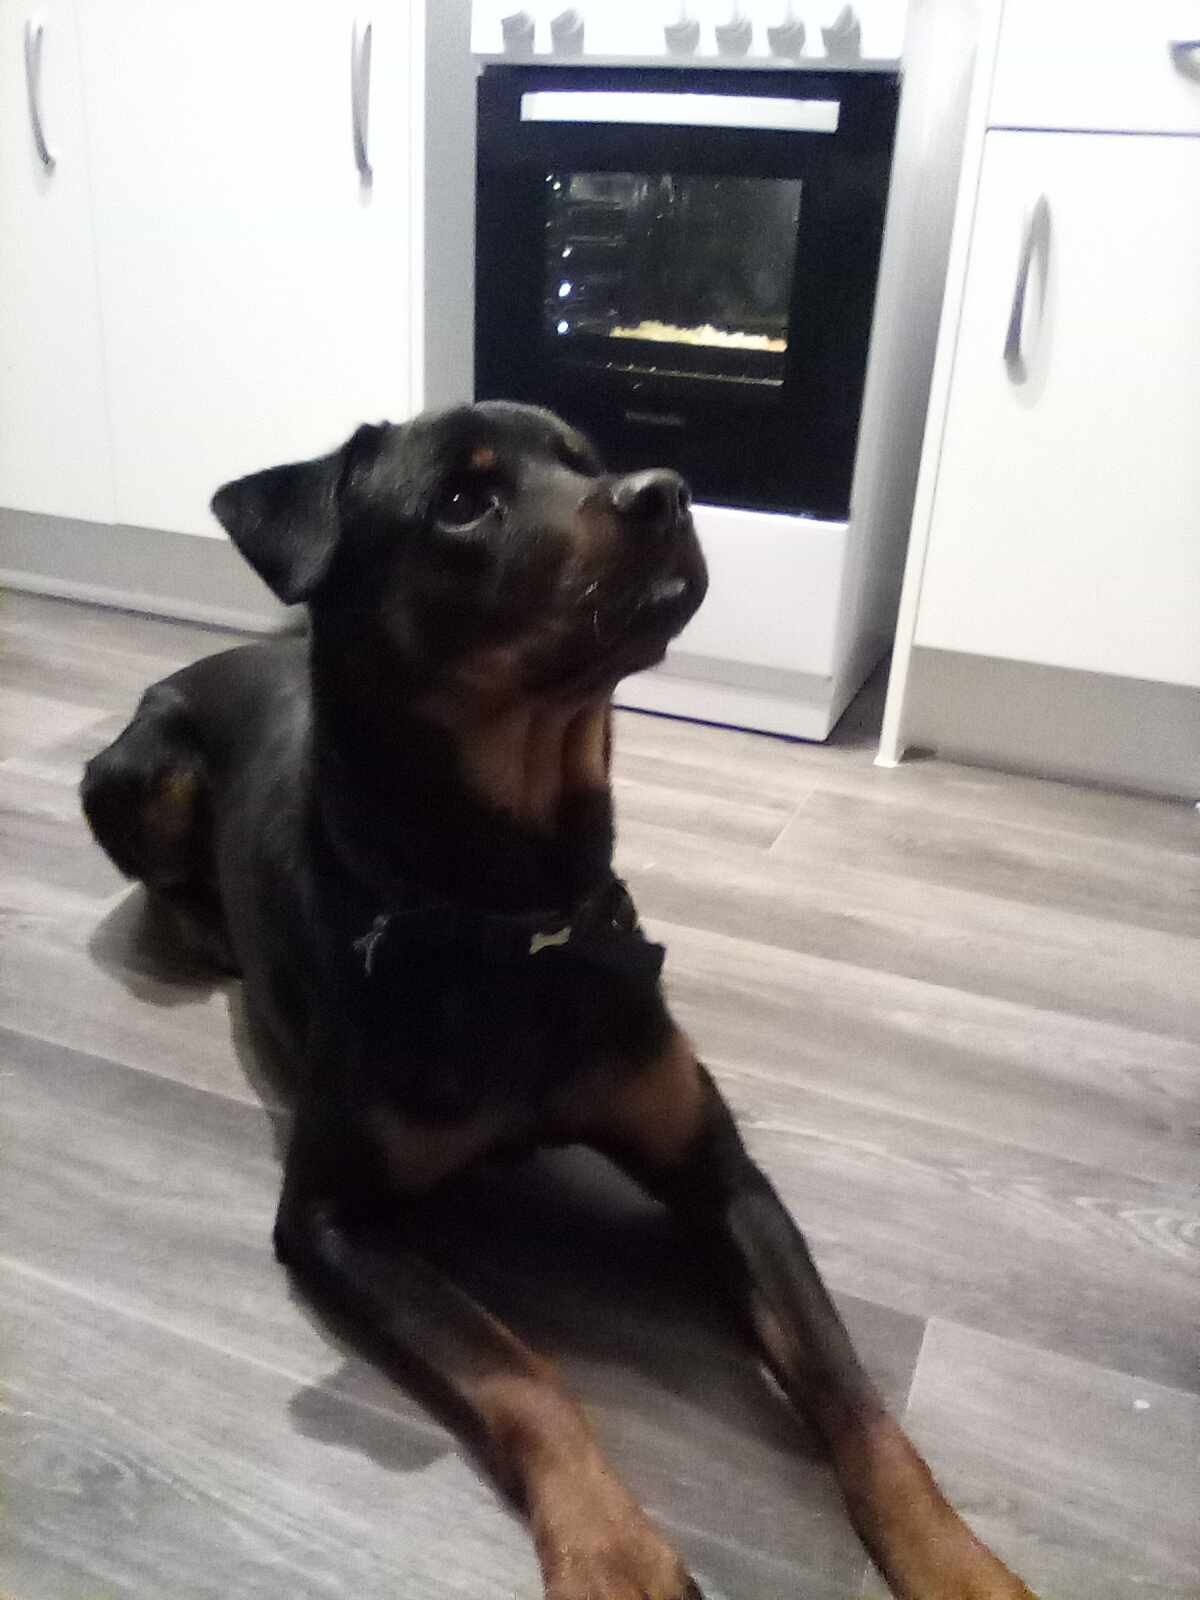 American Rottweiler 1 year old